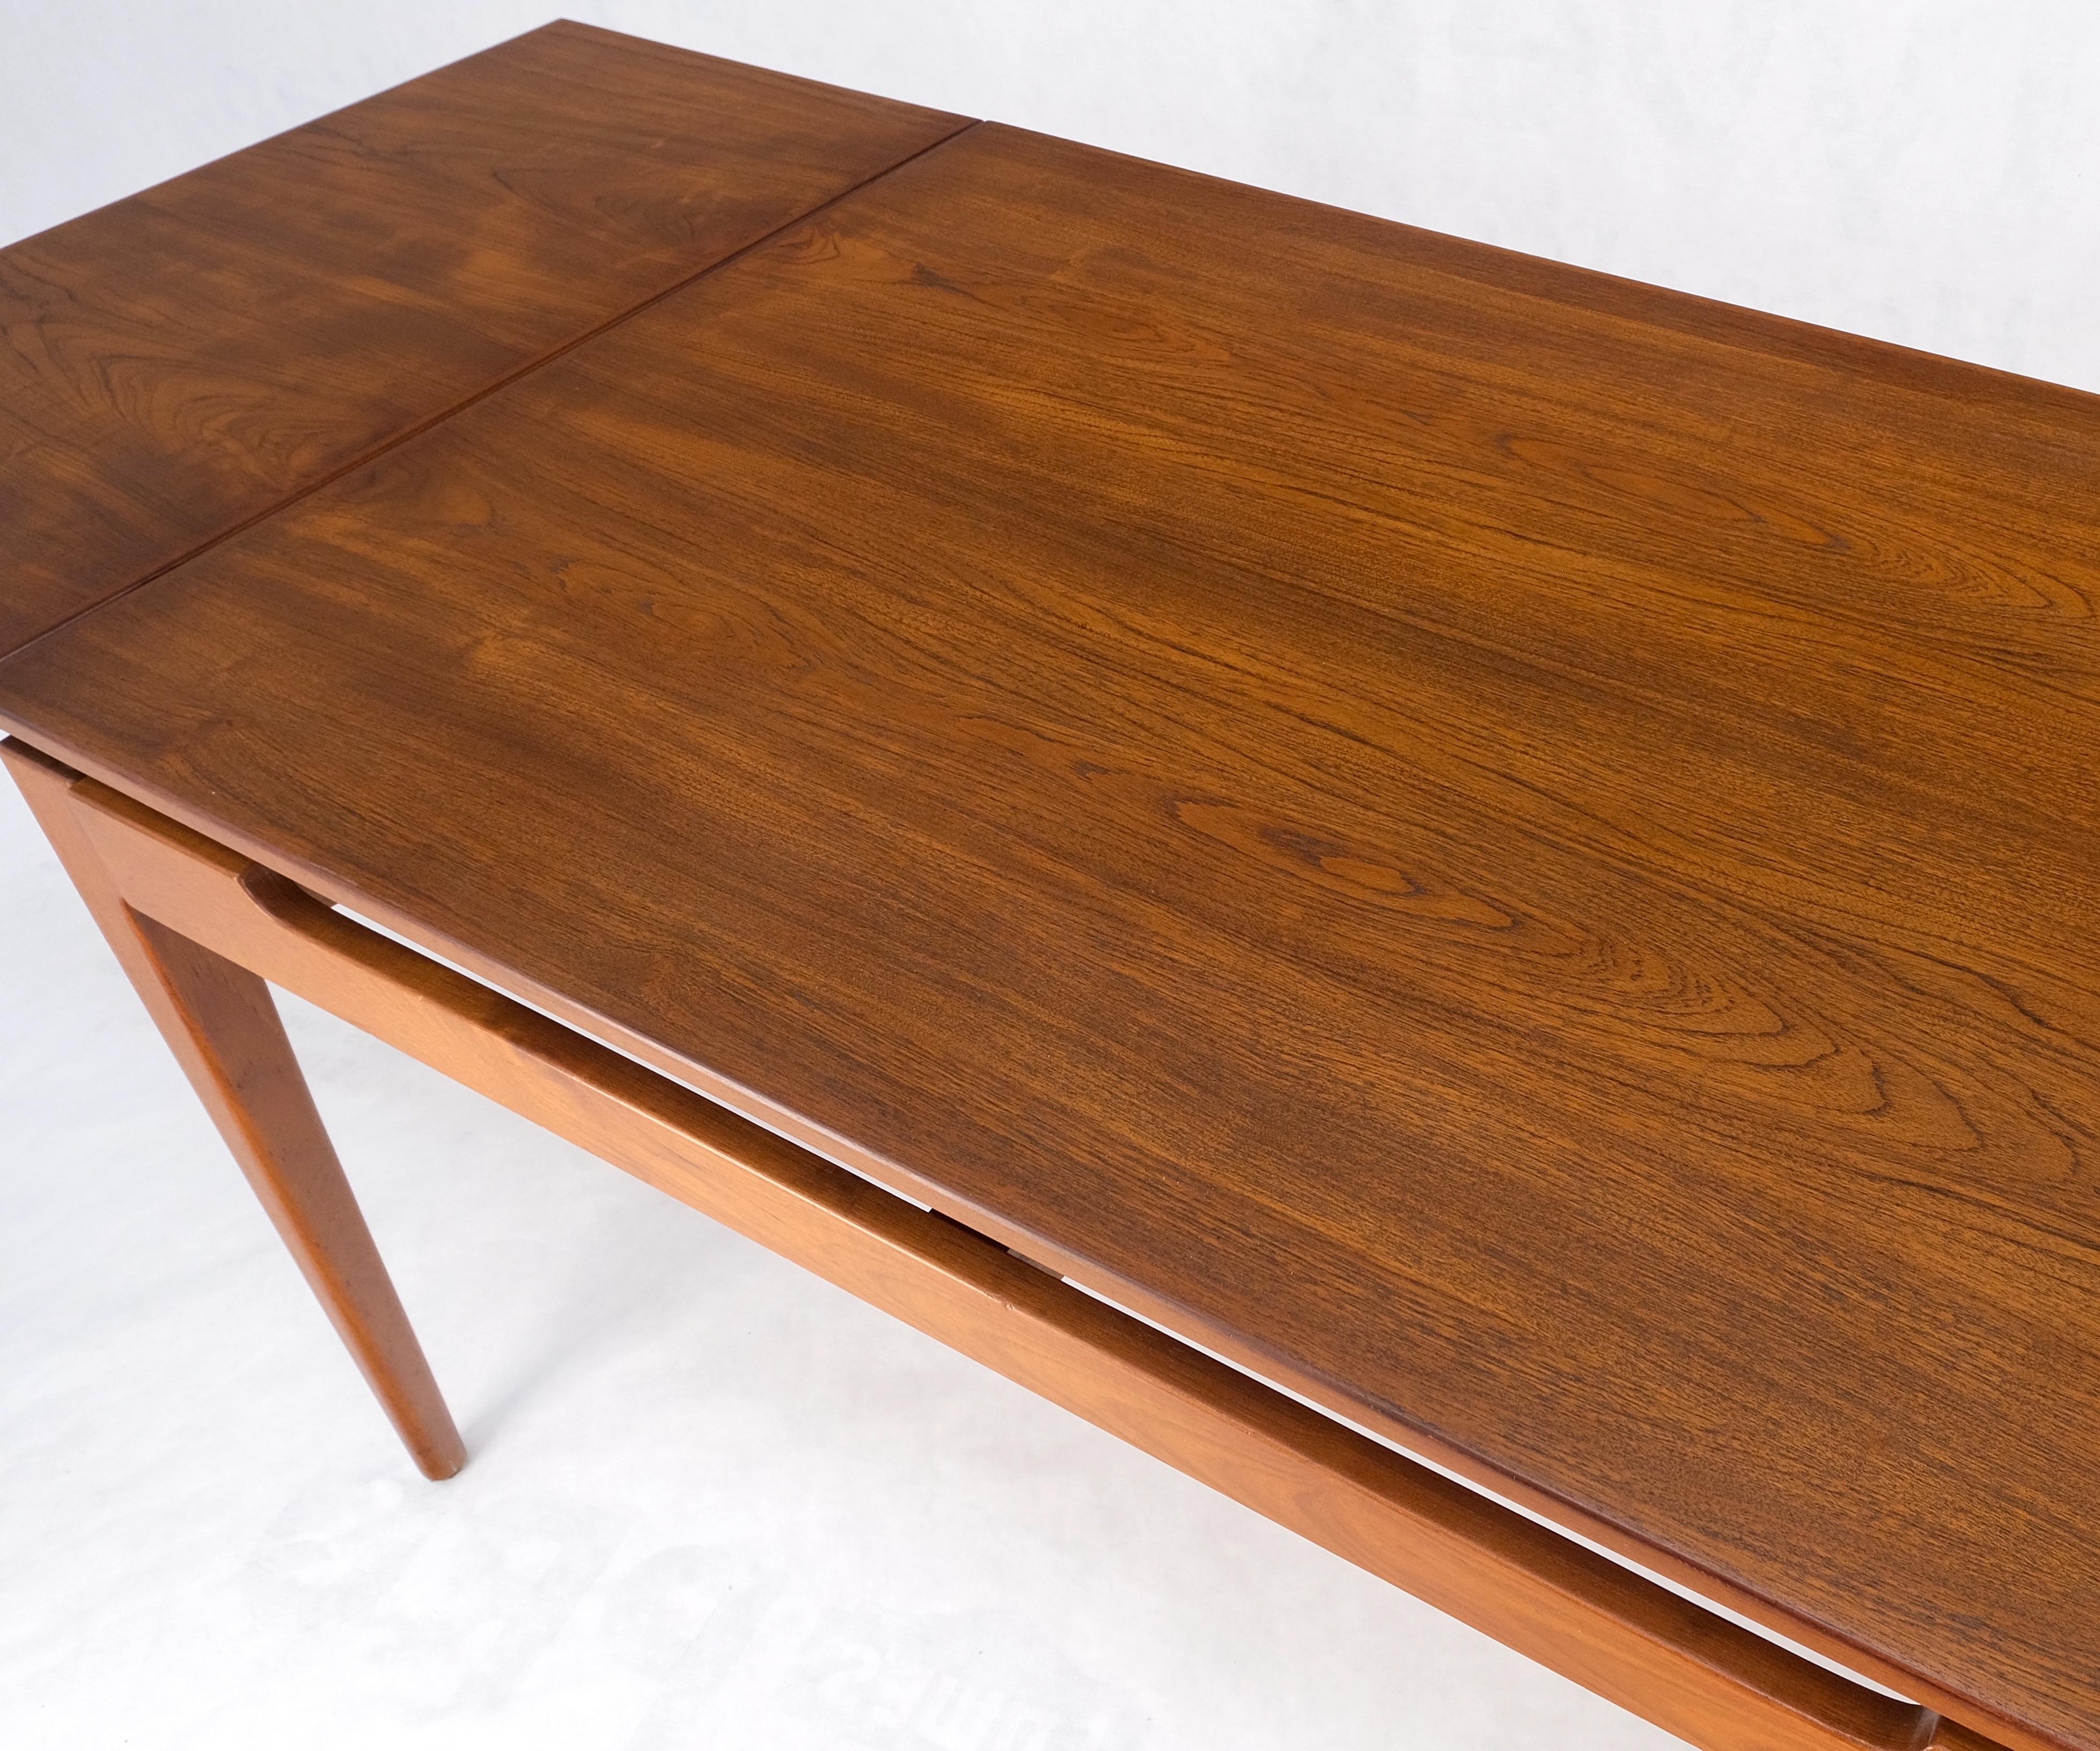 Danish Mid-Century Modern Teak Refectory Dining Table Two Leafs Mint! For Sale 1